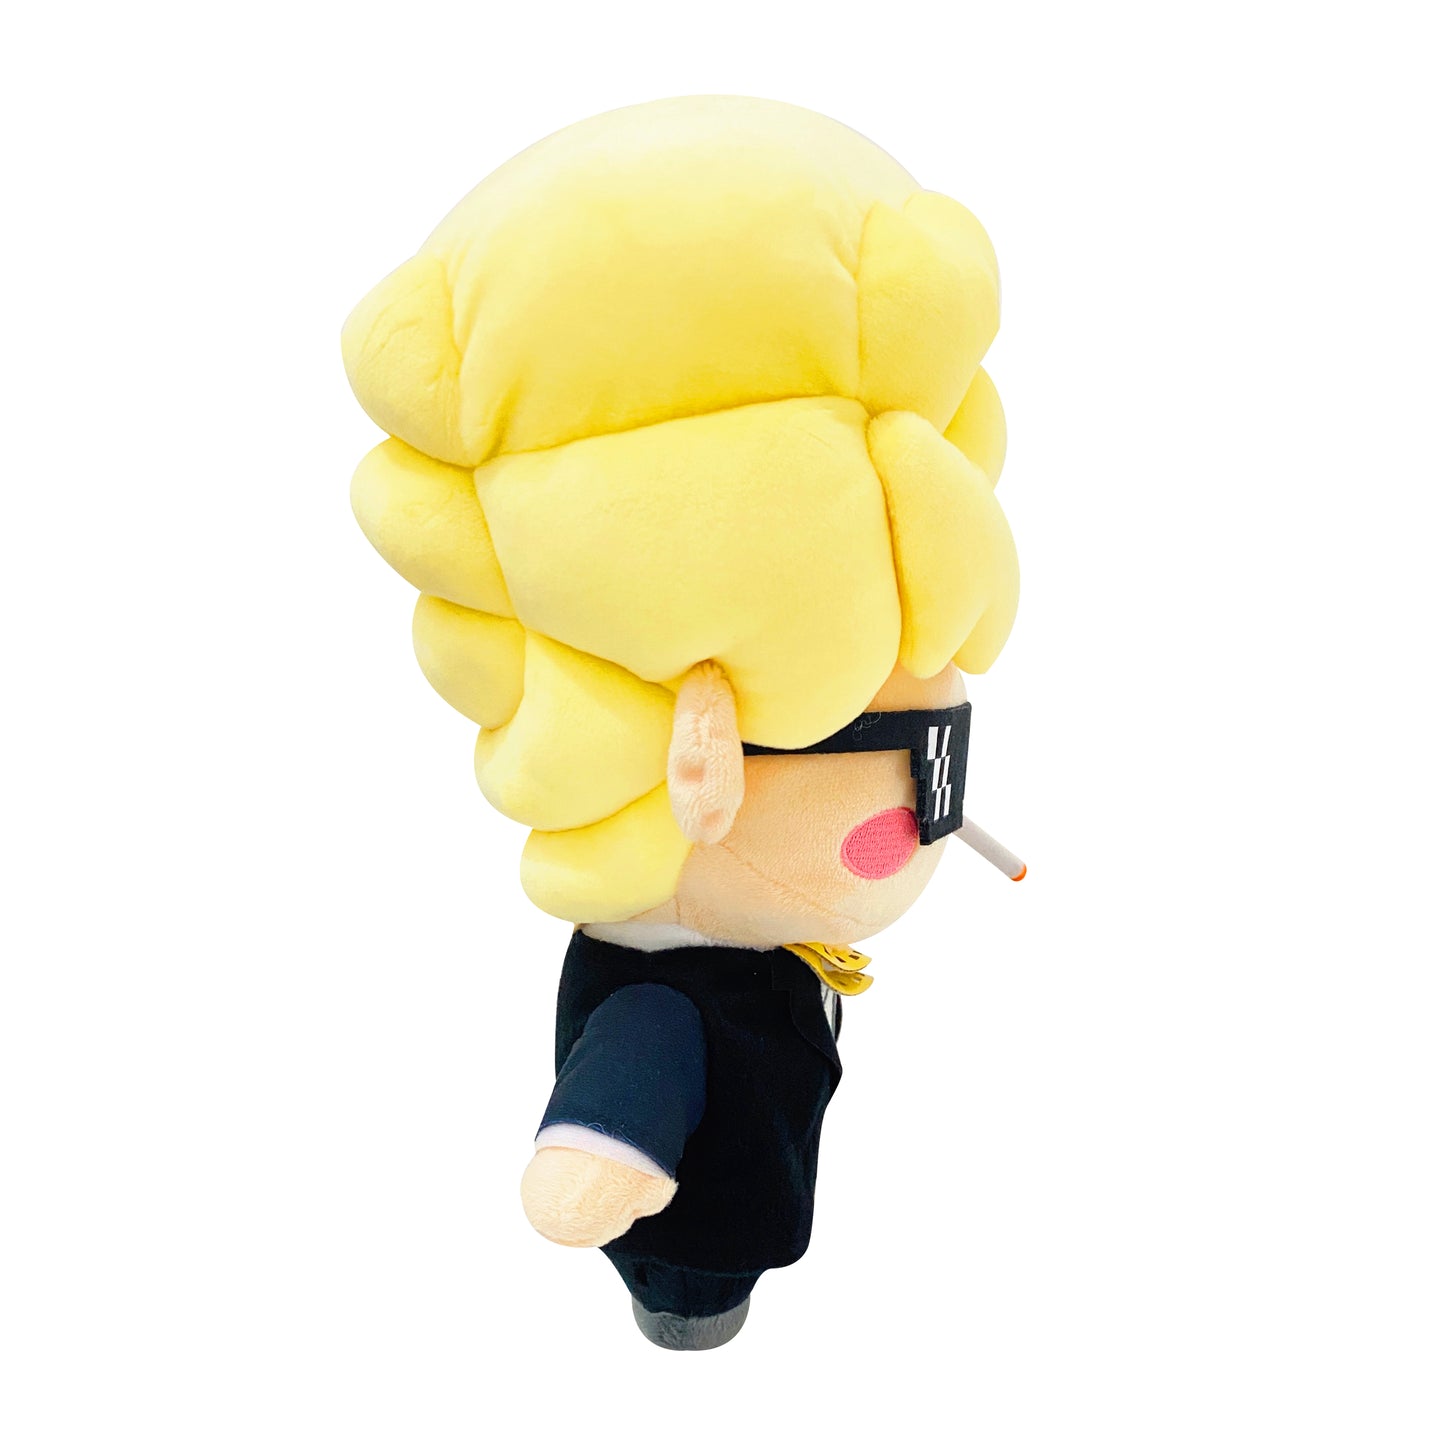 Chibi in Chief: Trump Thug Life OG Plush - Hip Hop Swag & Shades for All Ages!